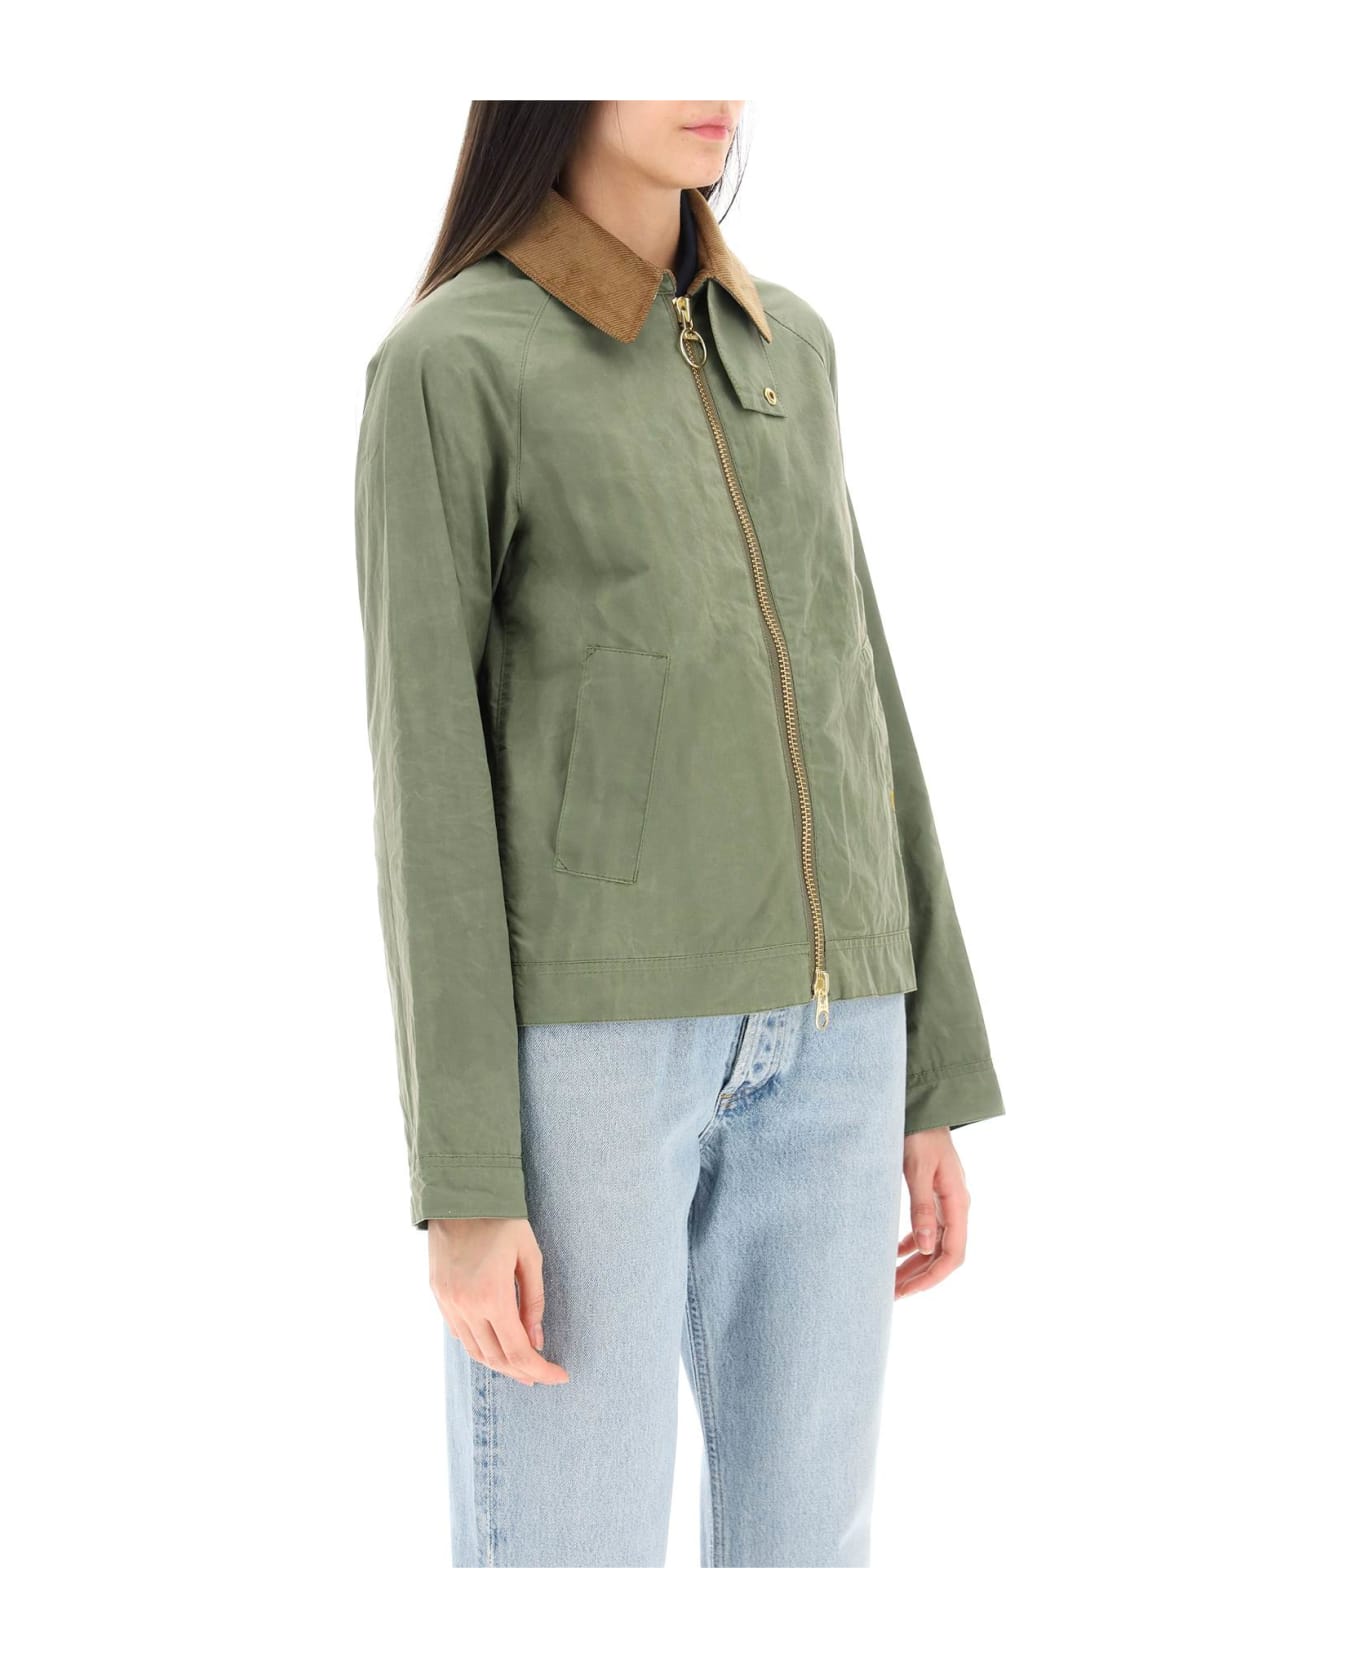 Barbour Campbell Vintage Overshirt Jacket - ARMY GREEN ANCIENT (Green)